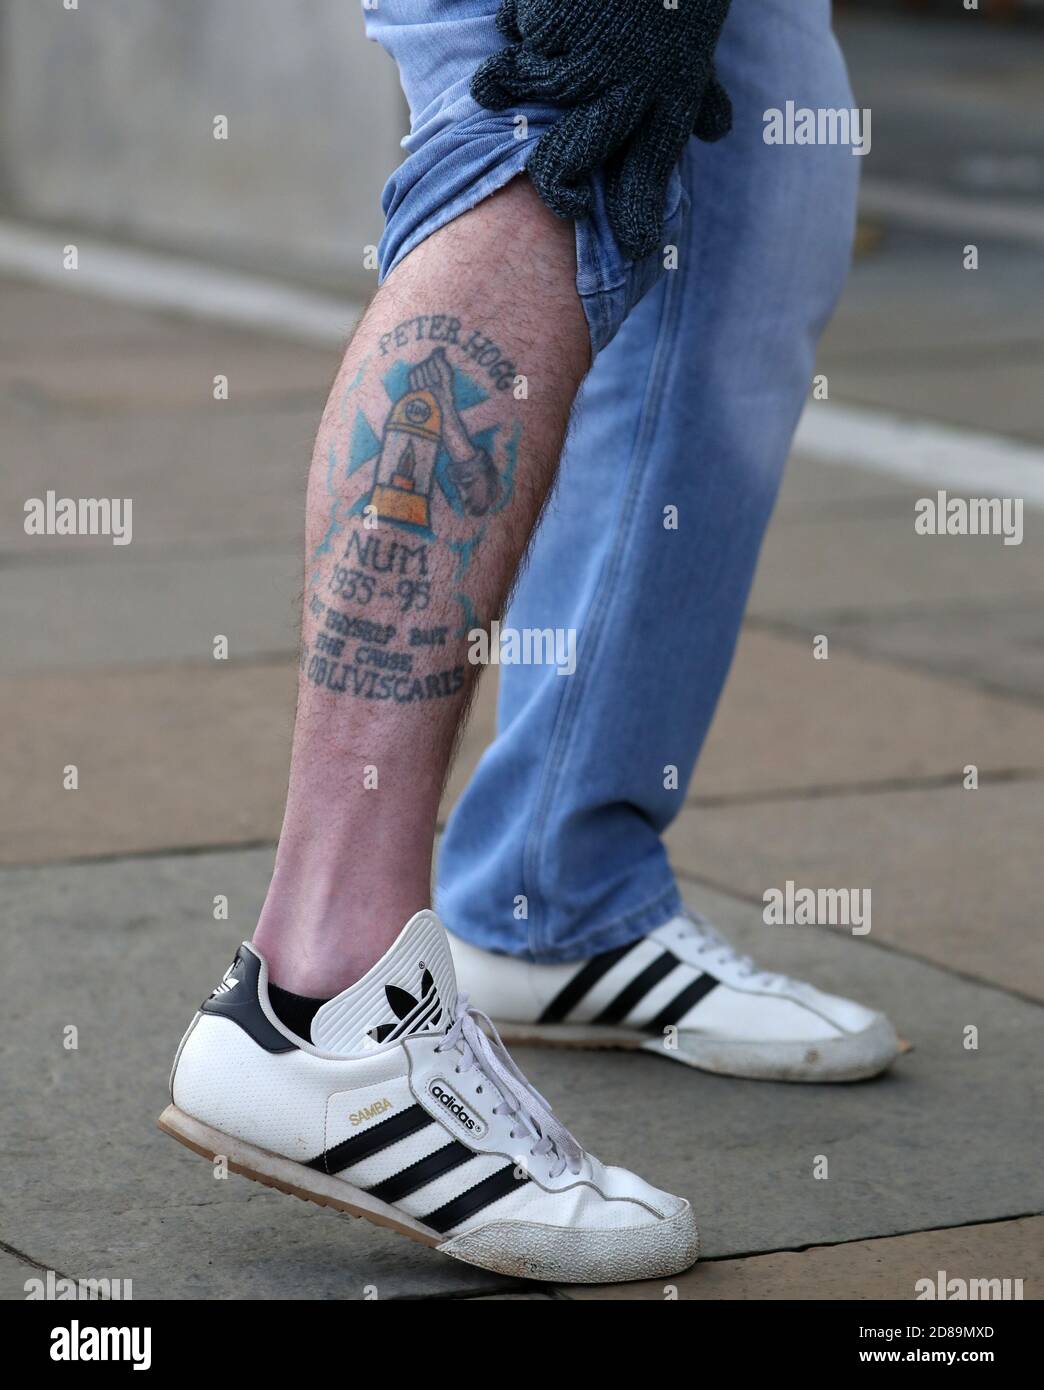 A former miner shows his tattoo outside the Scottish Parliament, Edinburgh, ahead of Scottish Government's response to recommendations made by the Independent Review of the of 1984/85 Miners' Strike.